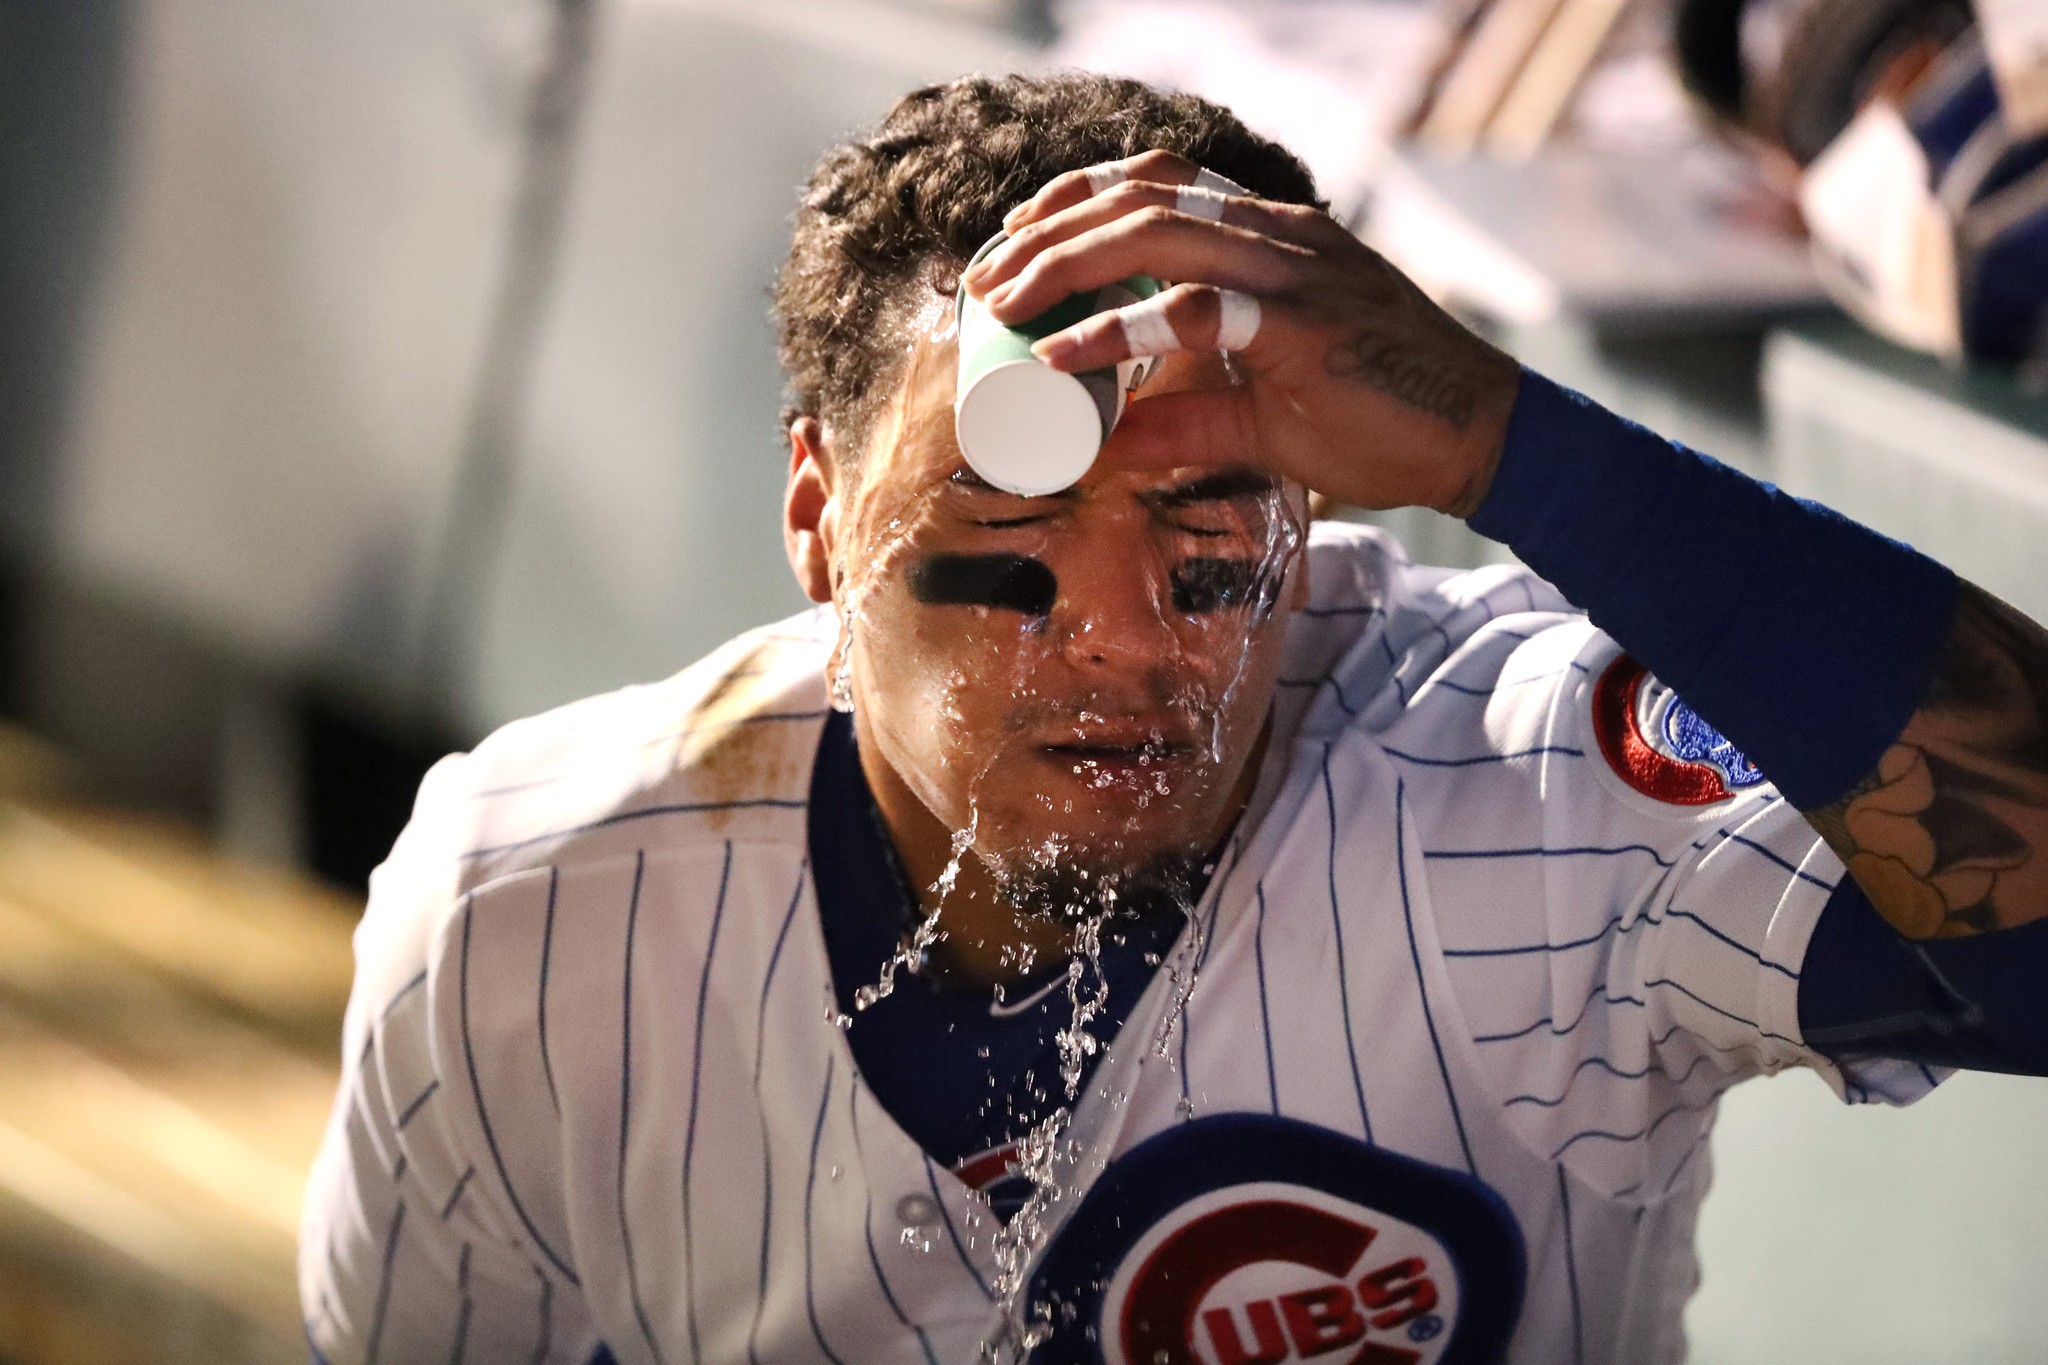 Proposed MLB rules: shower at home, don't spit, Sports